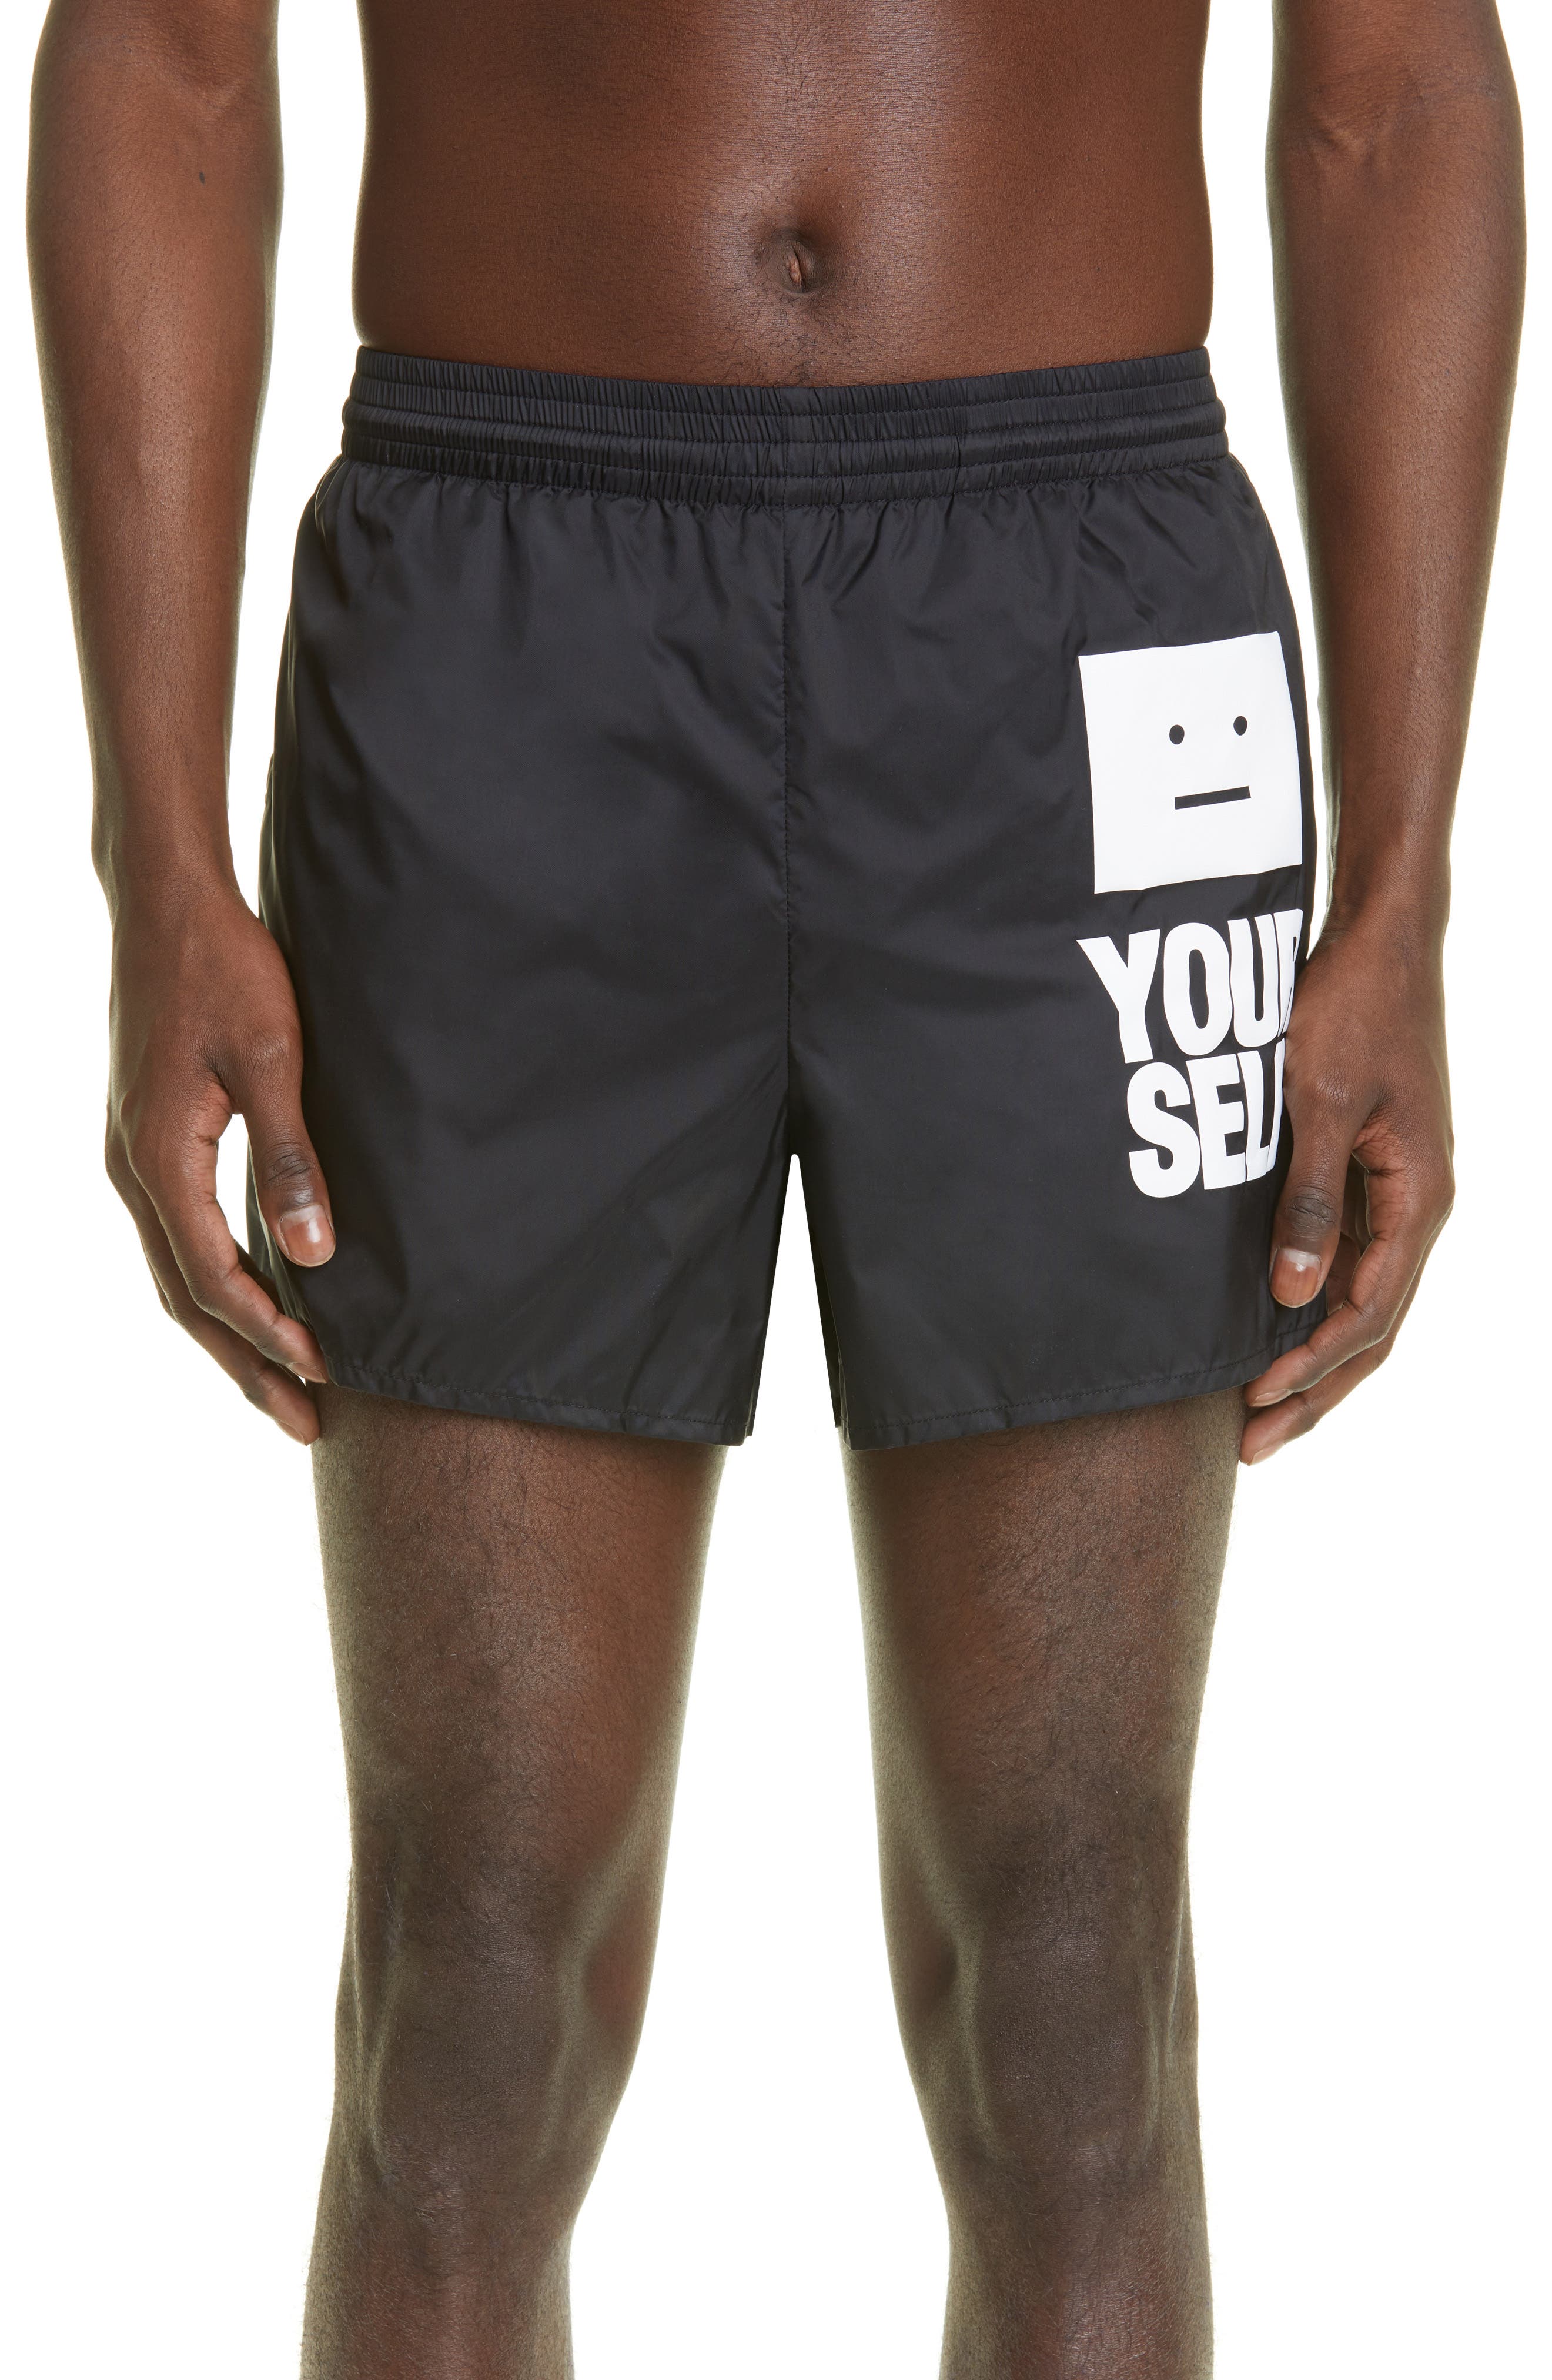 Acne Studios Face Yourself Recycled Nylon Swim Trunks in Black at Nordstrom, Size Small